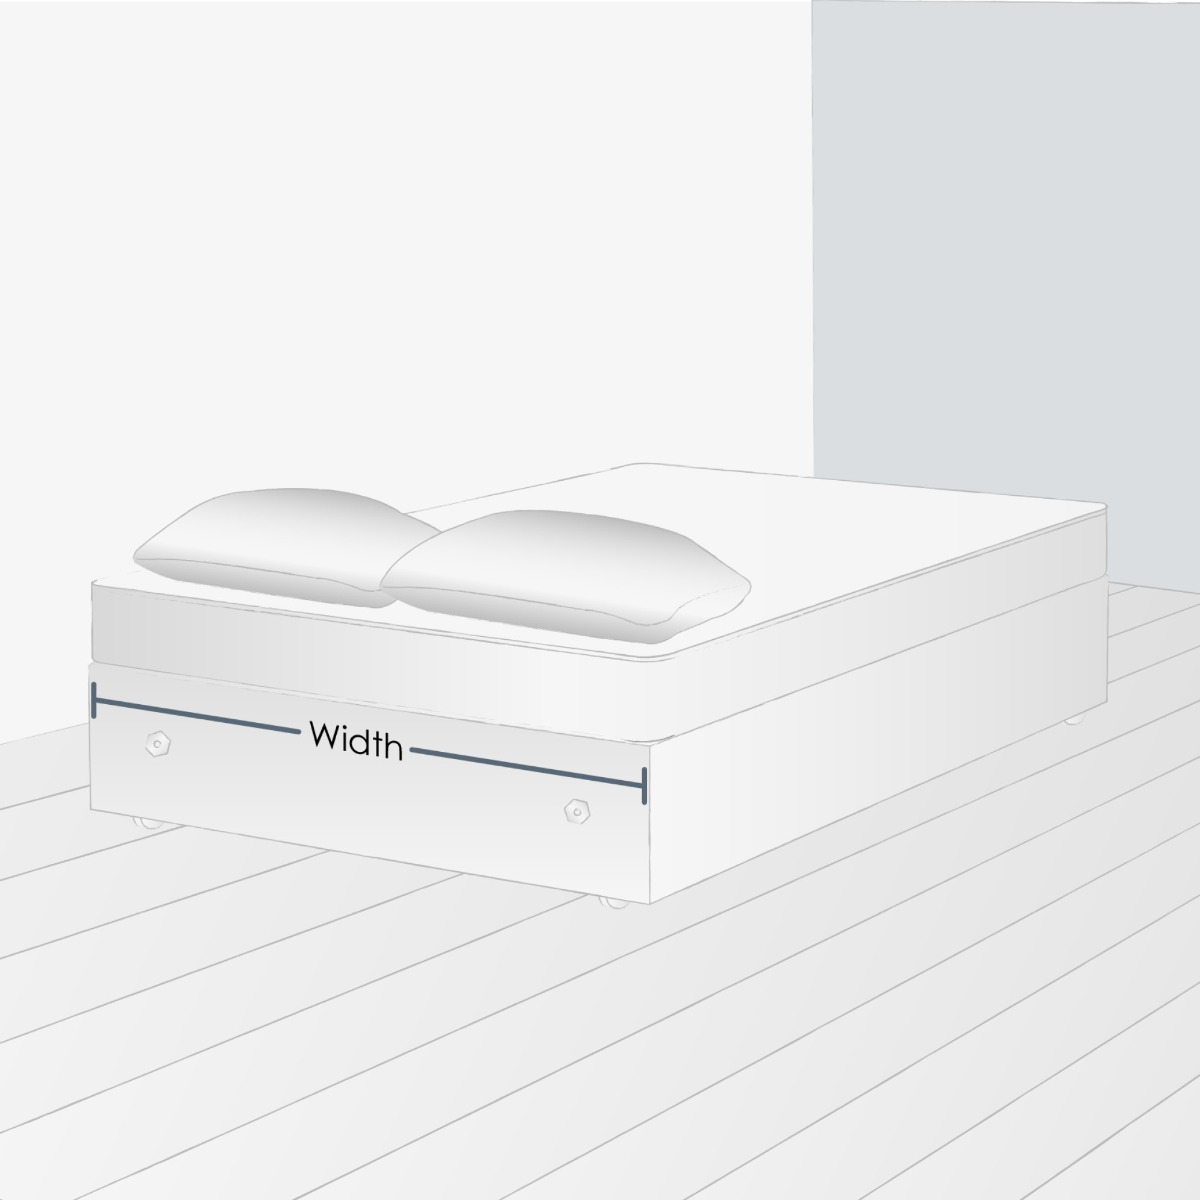 Measuring the bed width